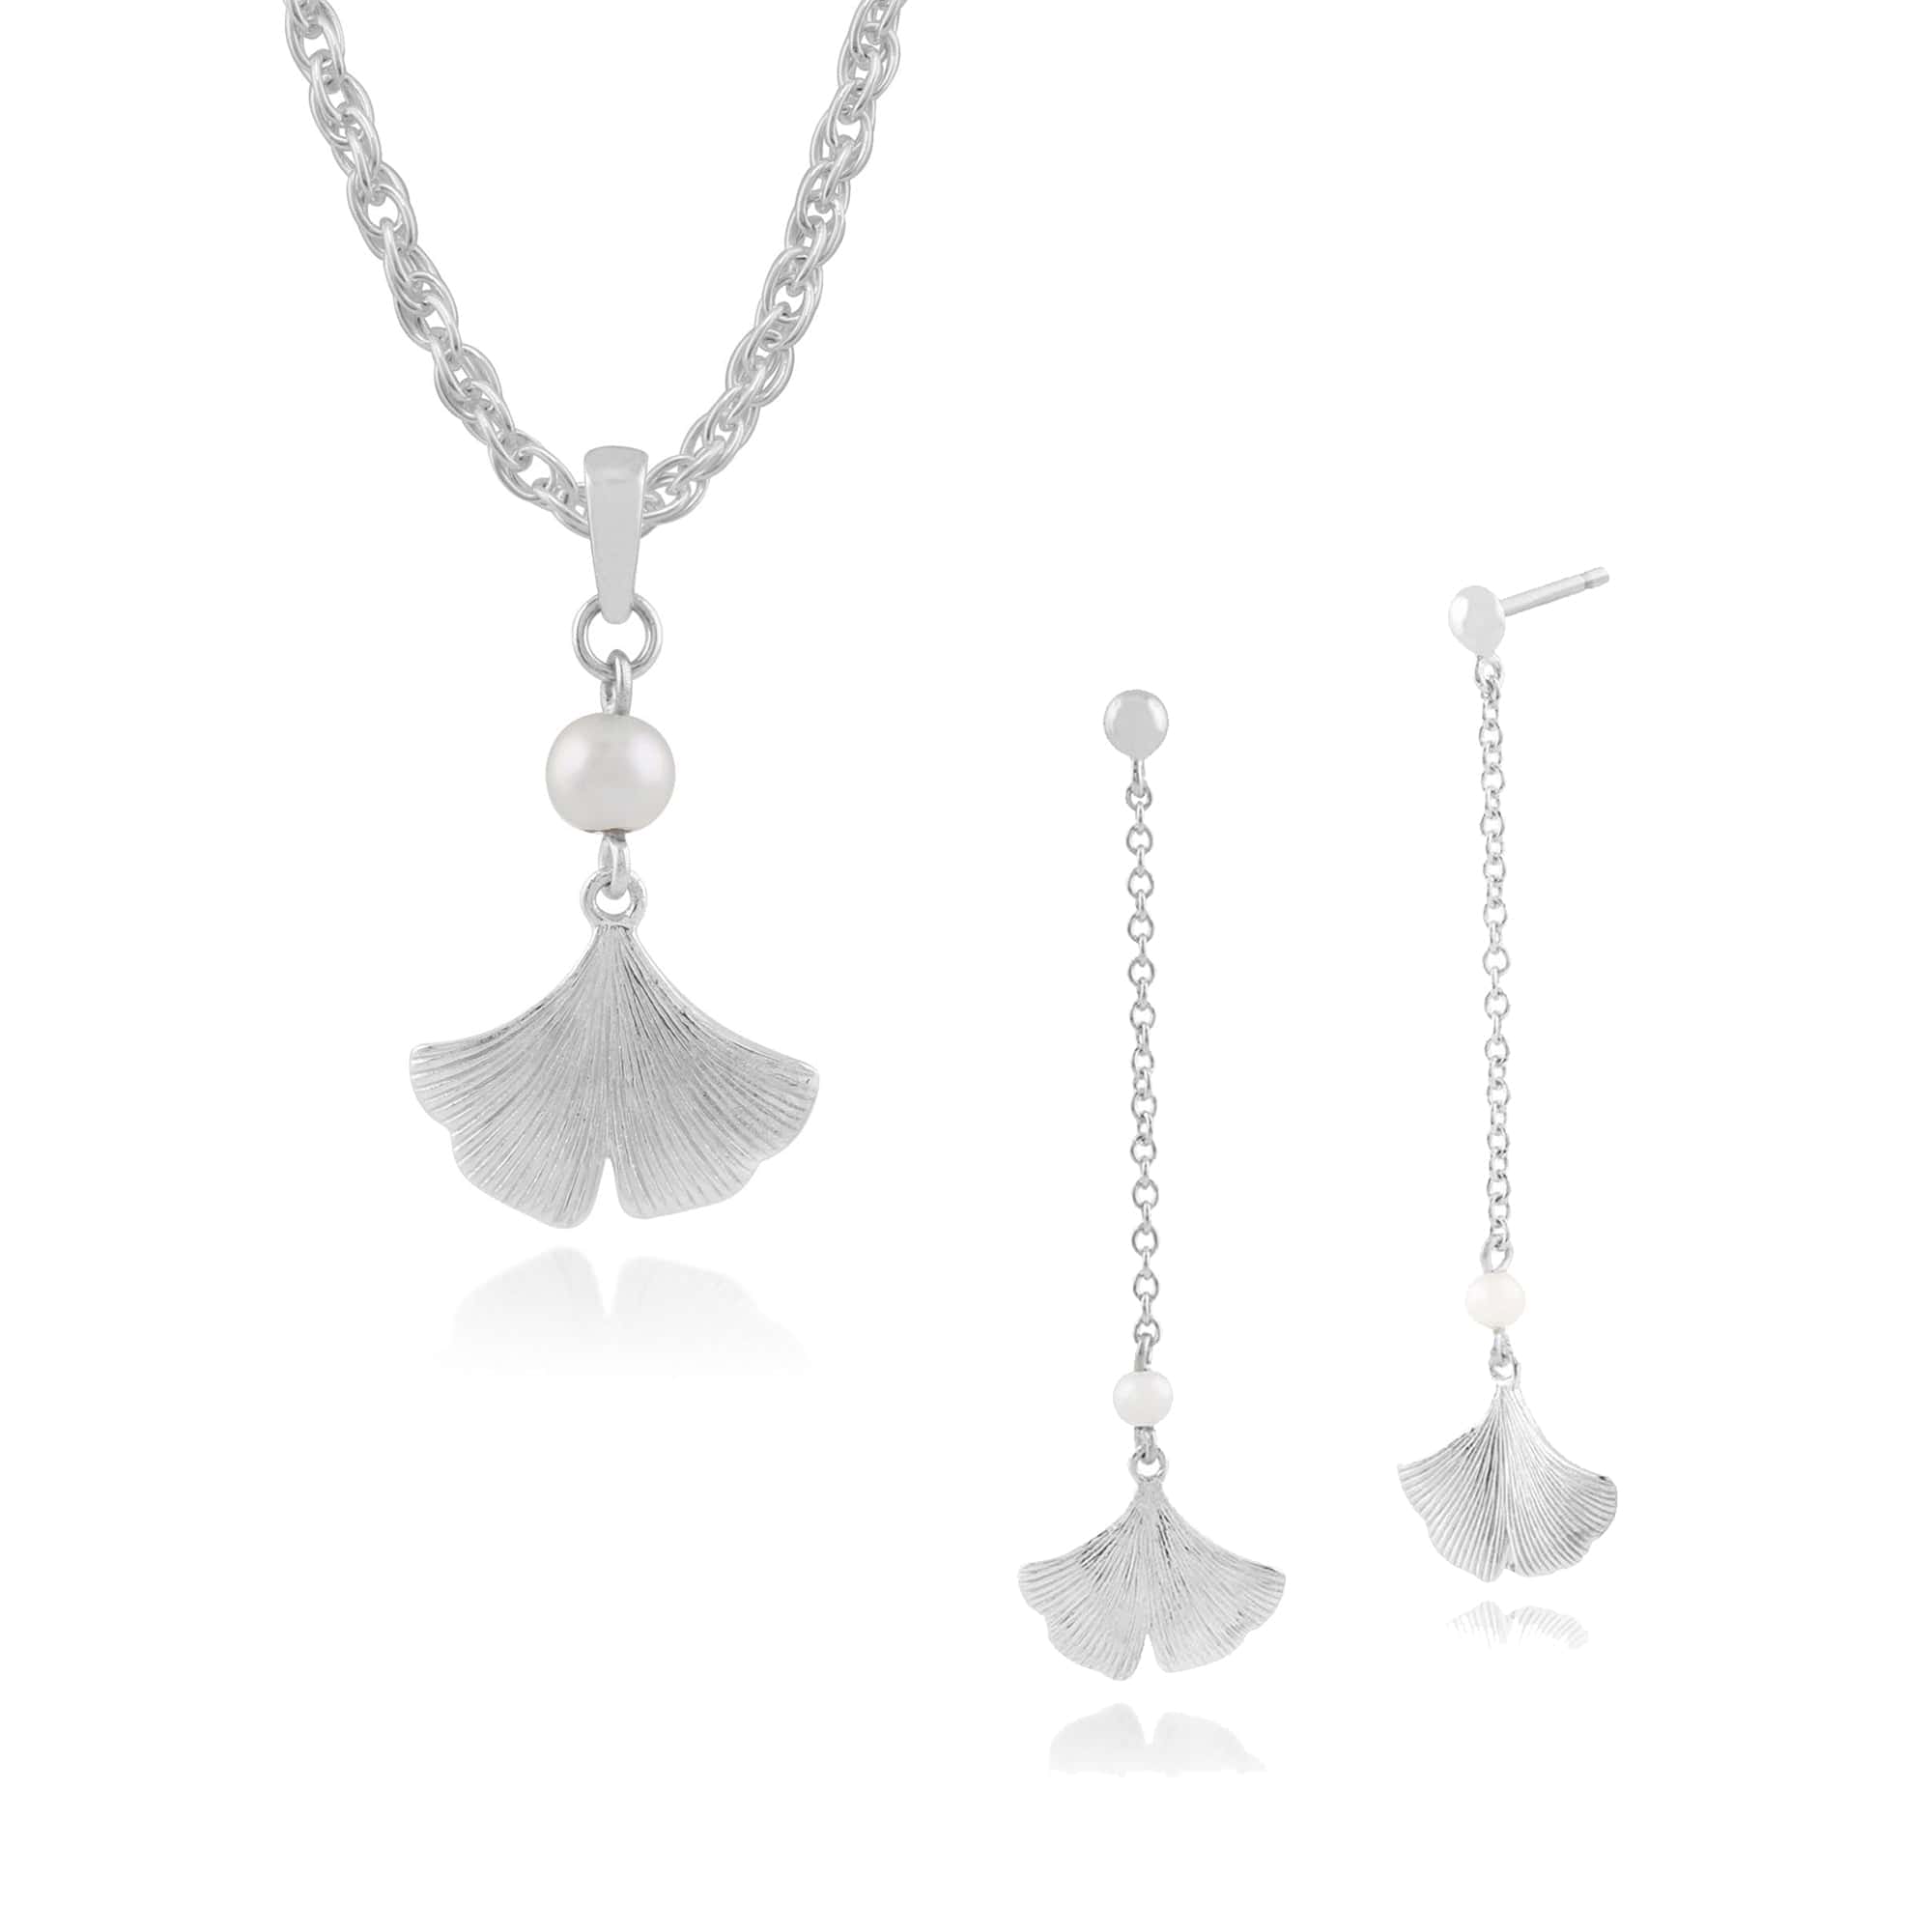 253E192601925-253P234901925 Floral Round Pearl Ginkgo Leaf Drop Earrings & Pendant Set in 925 Sterling Silver 1